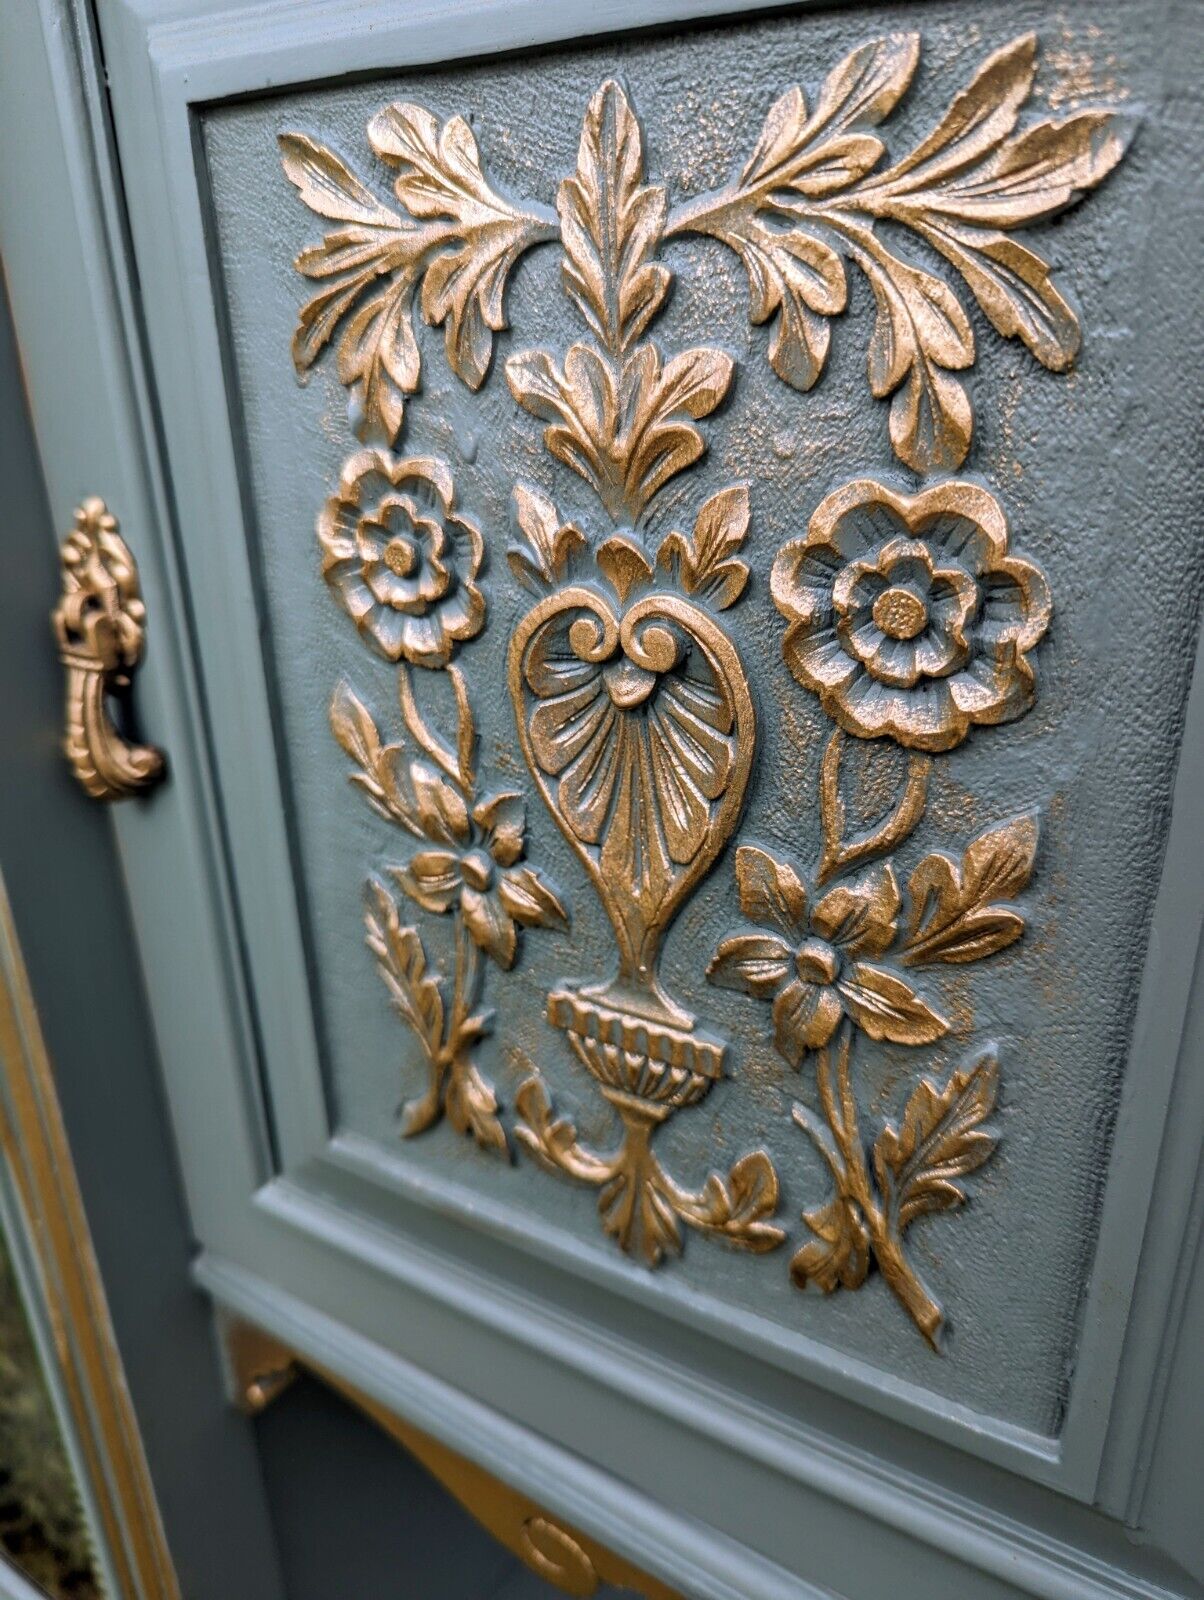 Vintage Stunning Decorative Edwardian Paint & Gilt Sideboard Delivery Available